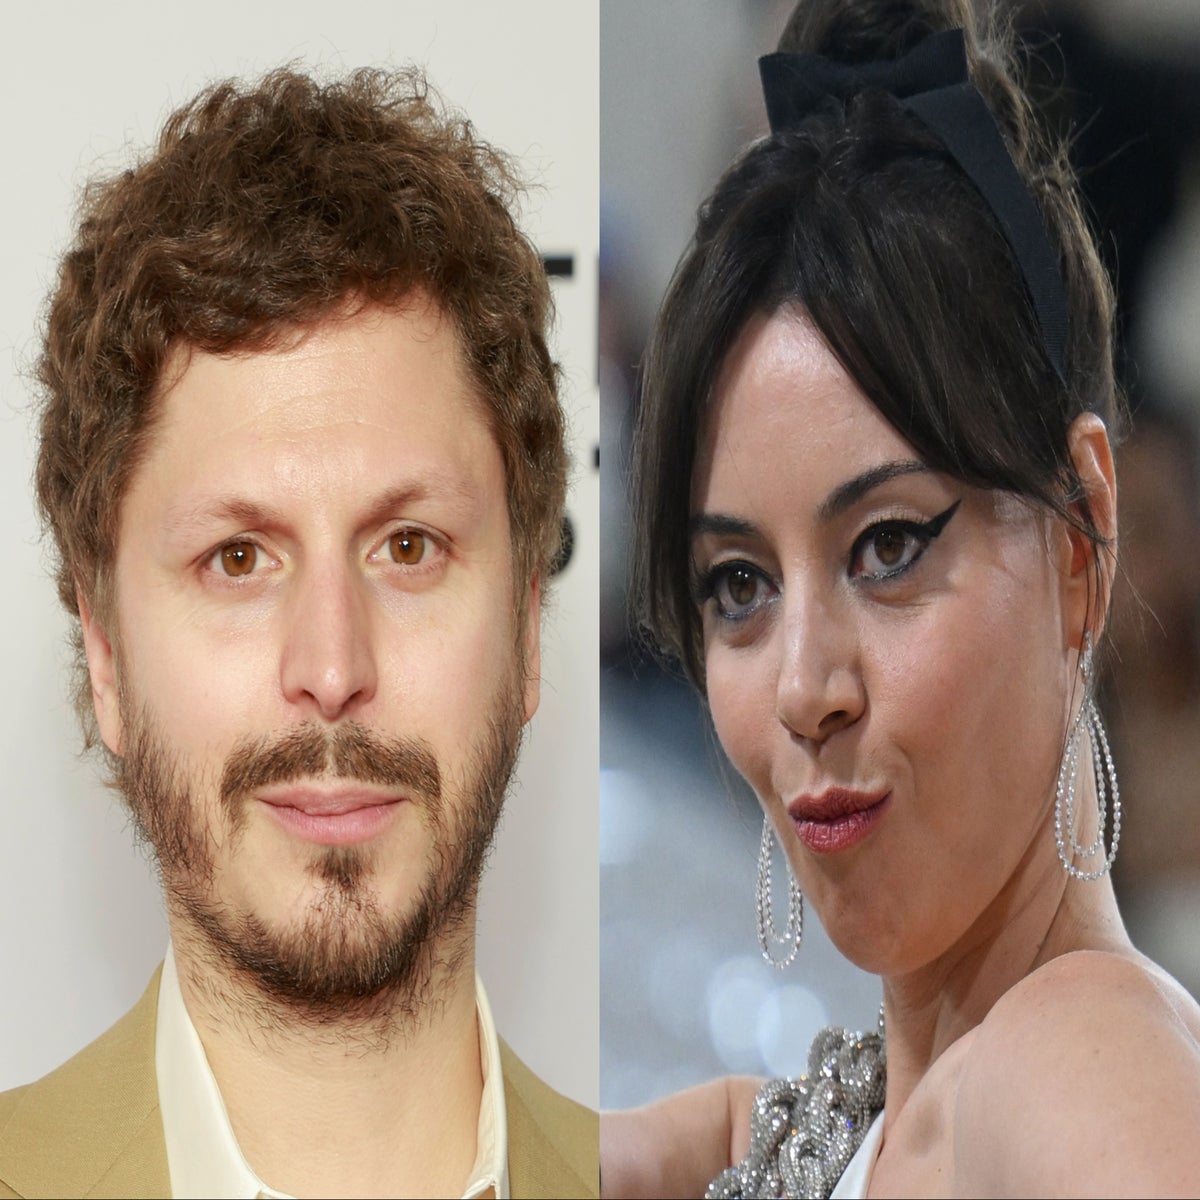 Michael Cera opens up about nearly 'spontaneously' marrying Aubrey Plaza